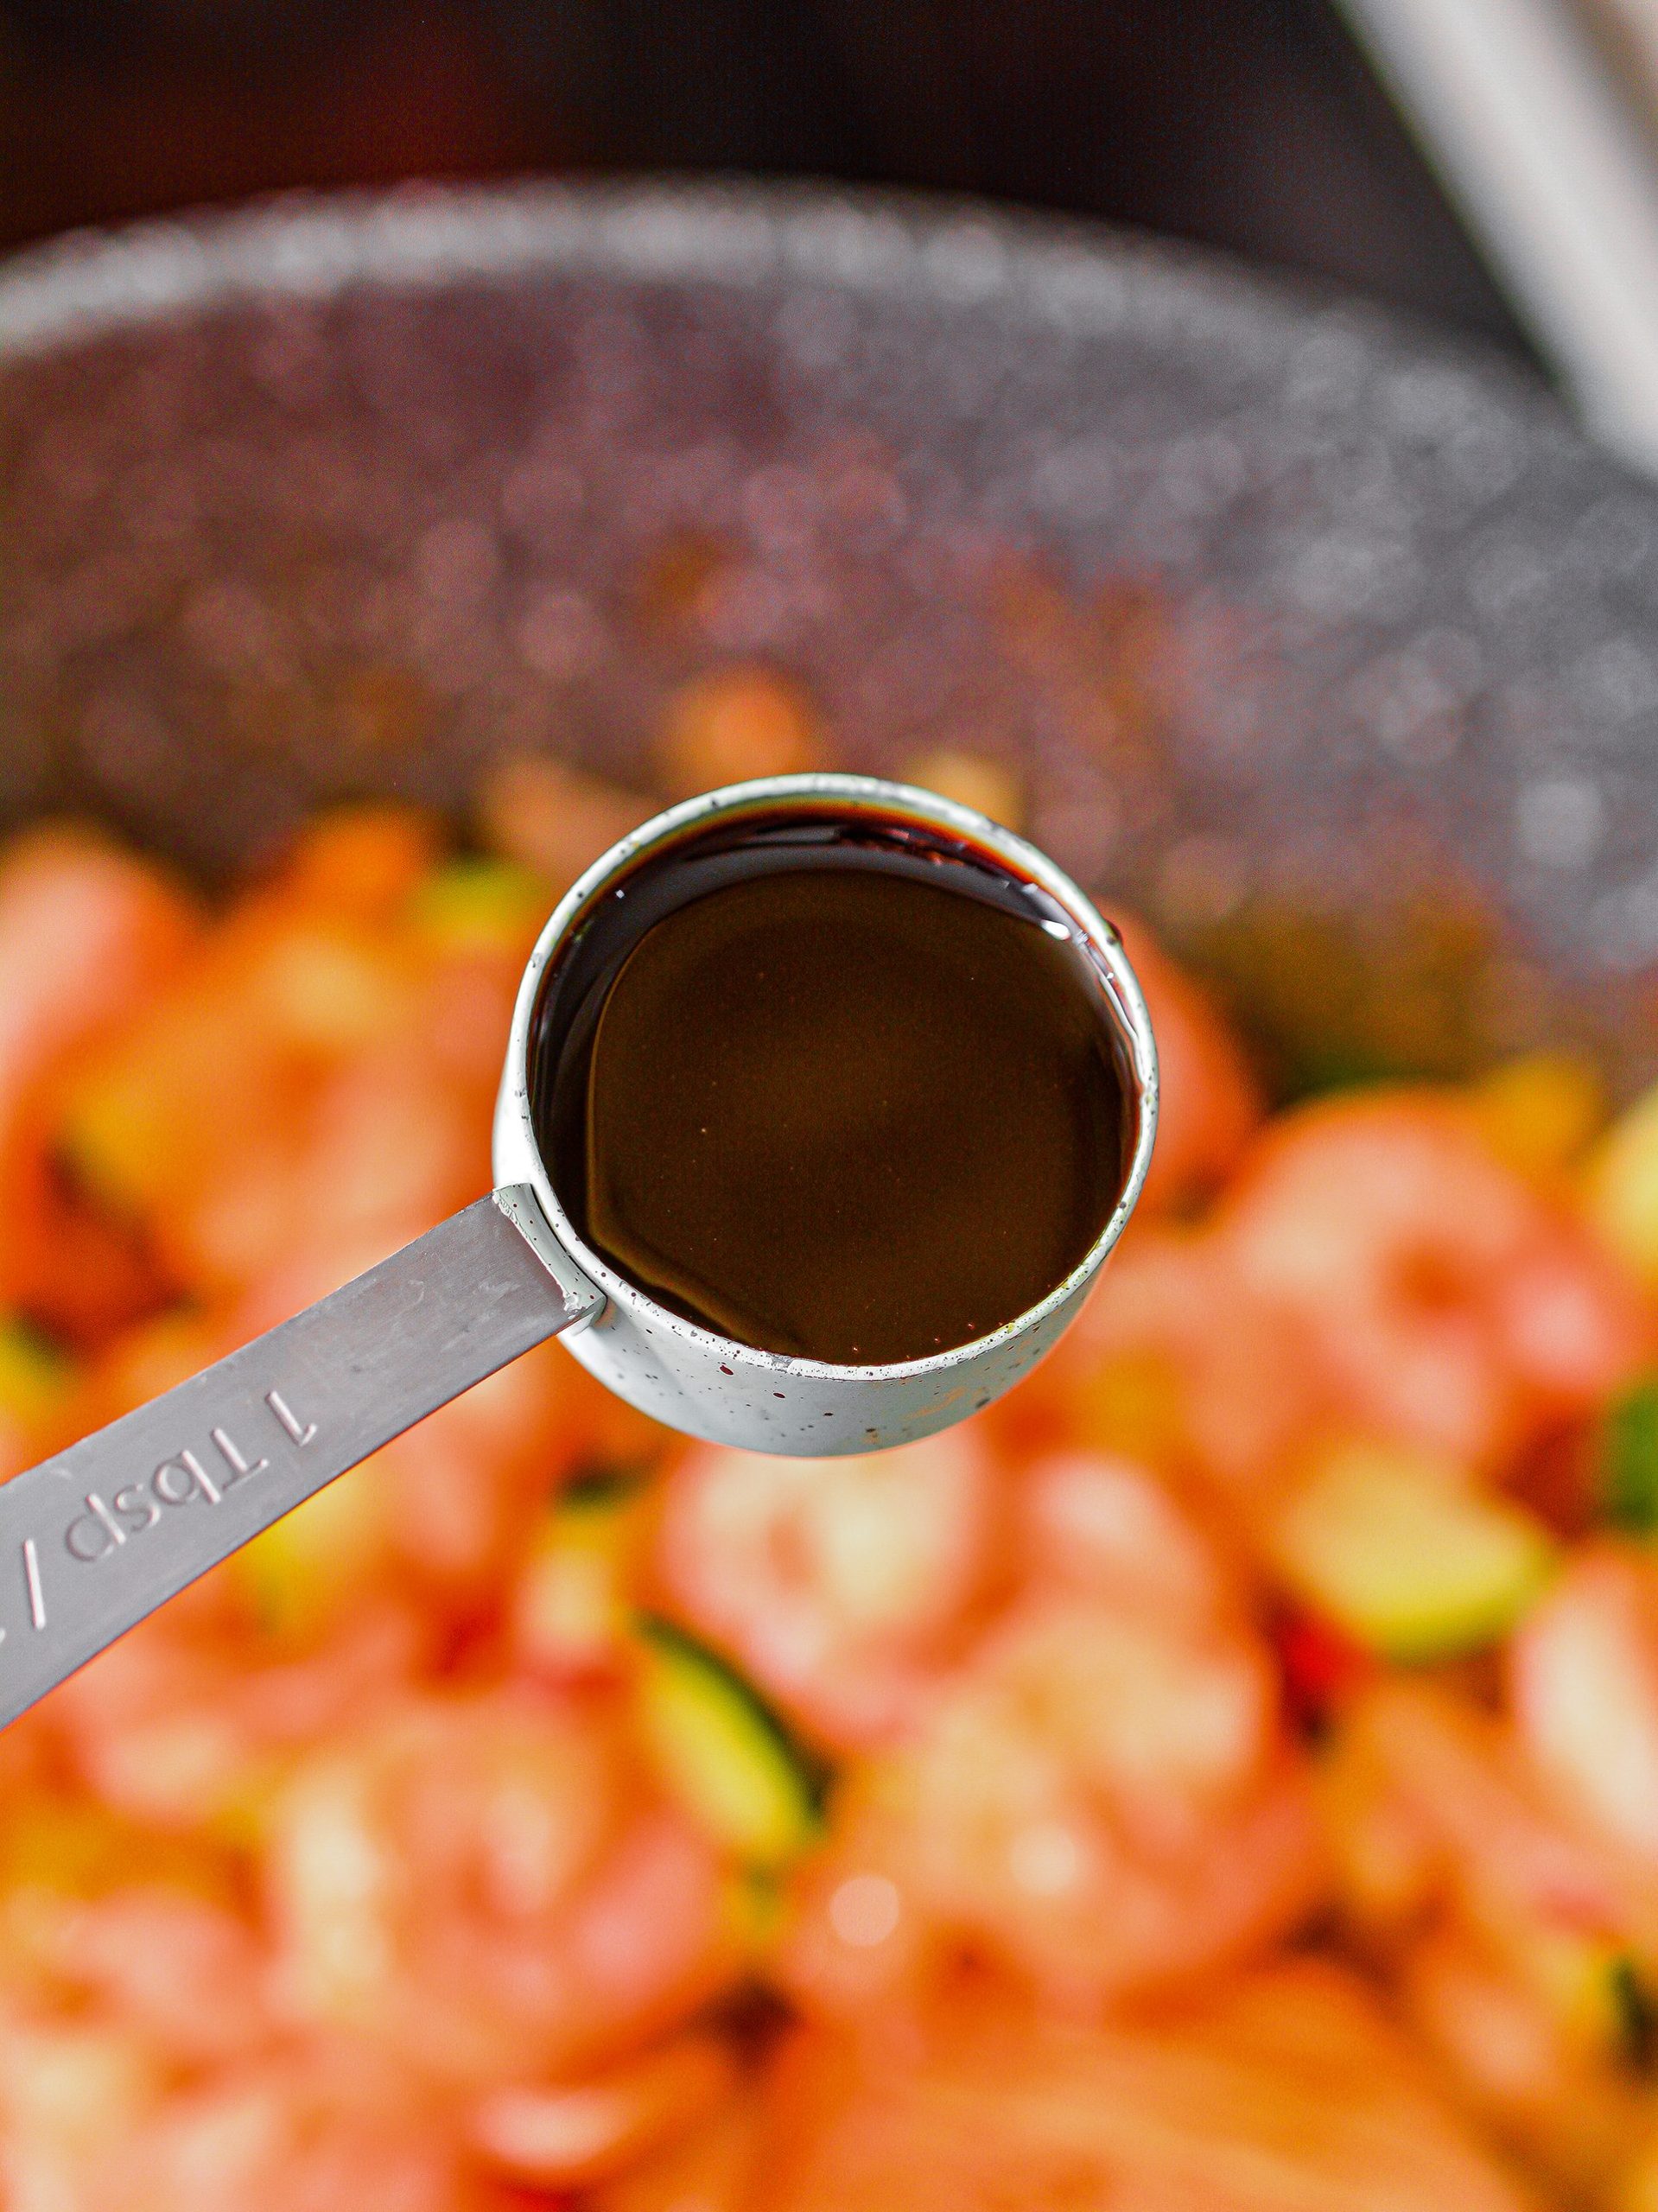 Place the shrimp bag in the skillet, and pour in the chili sauce as well as the soy sauce.